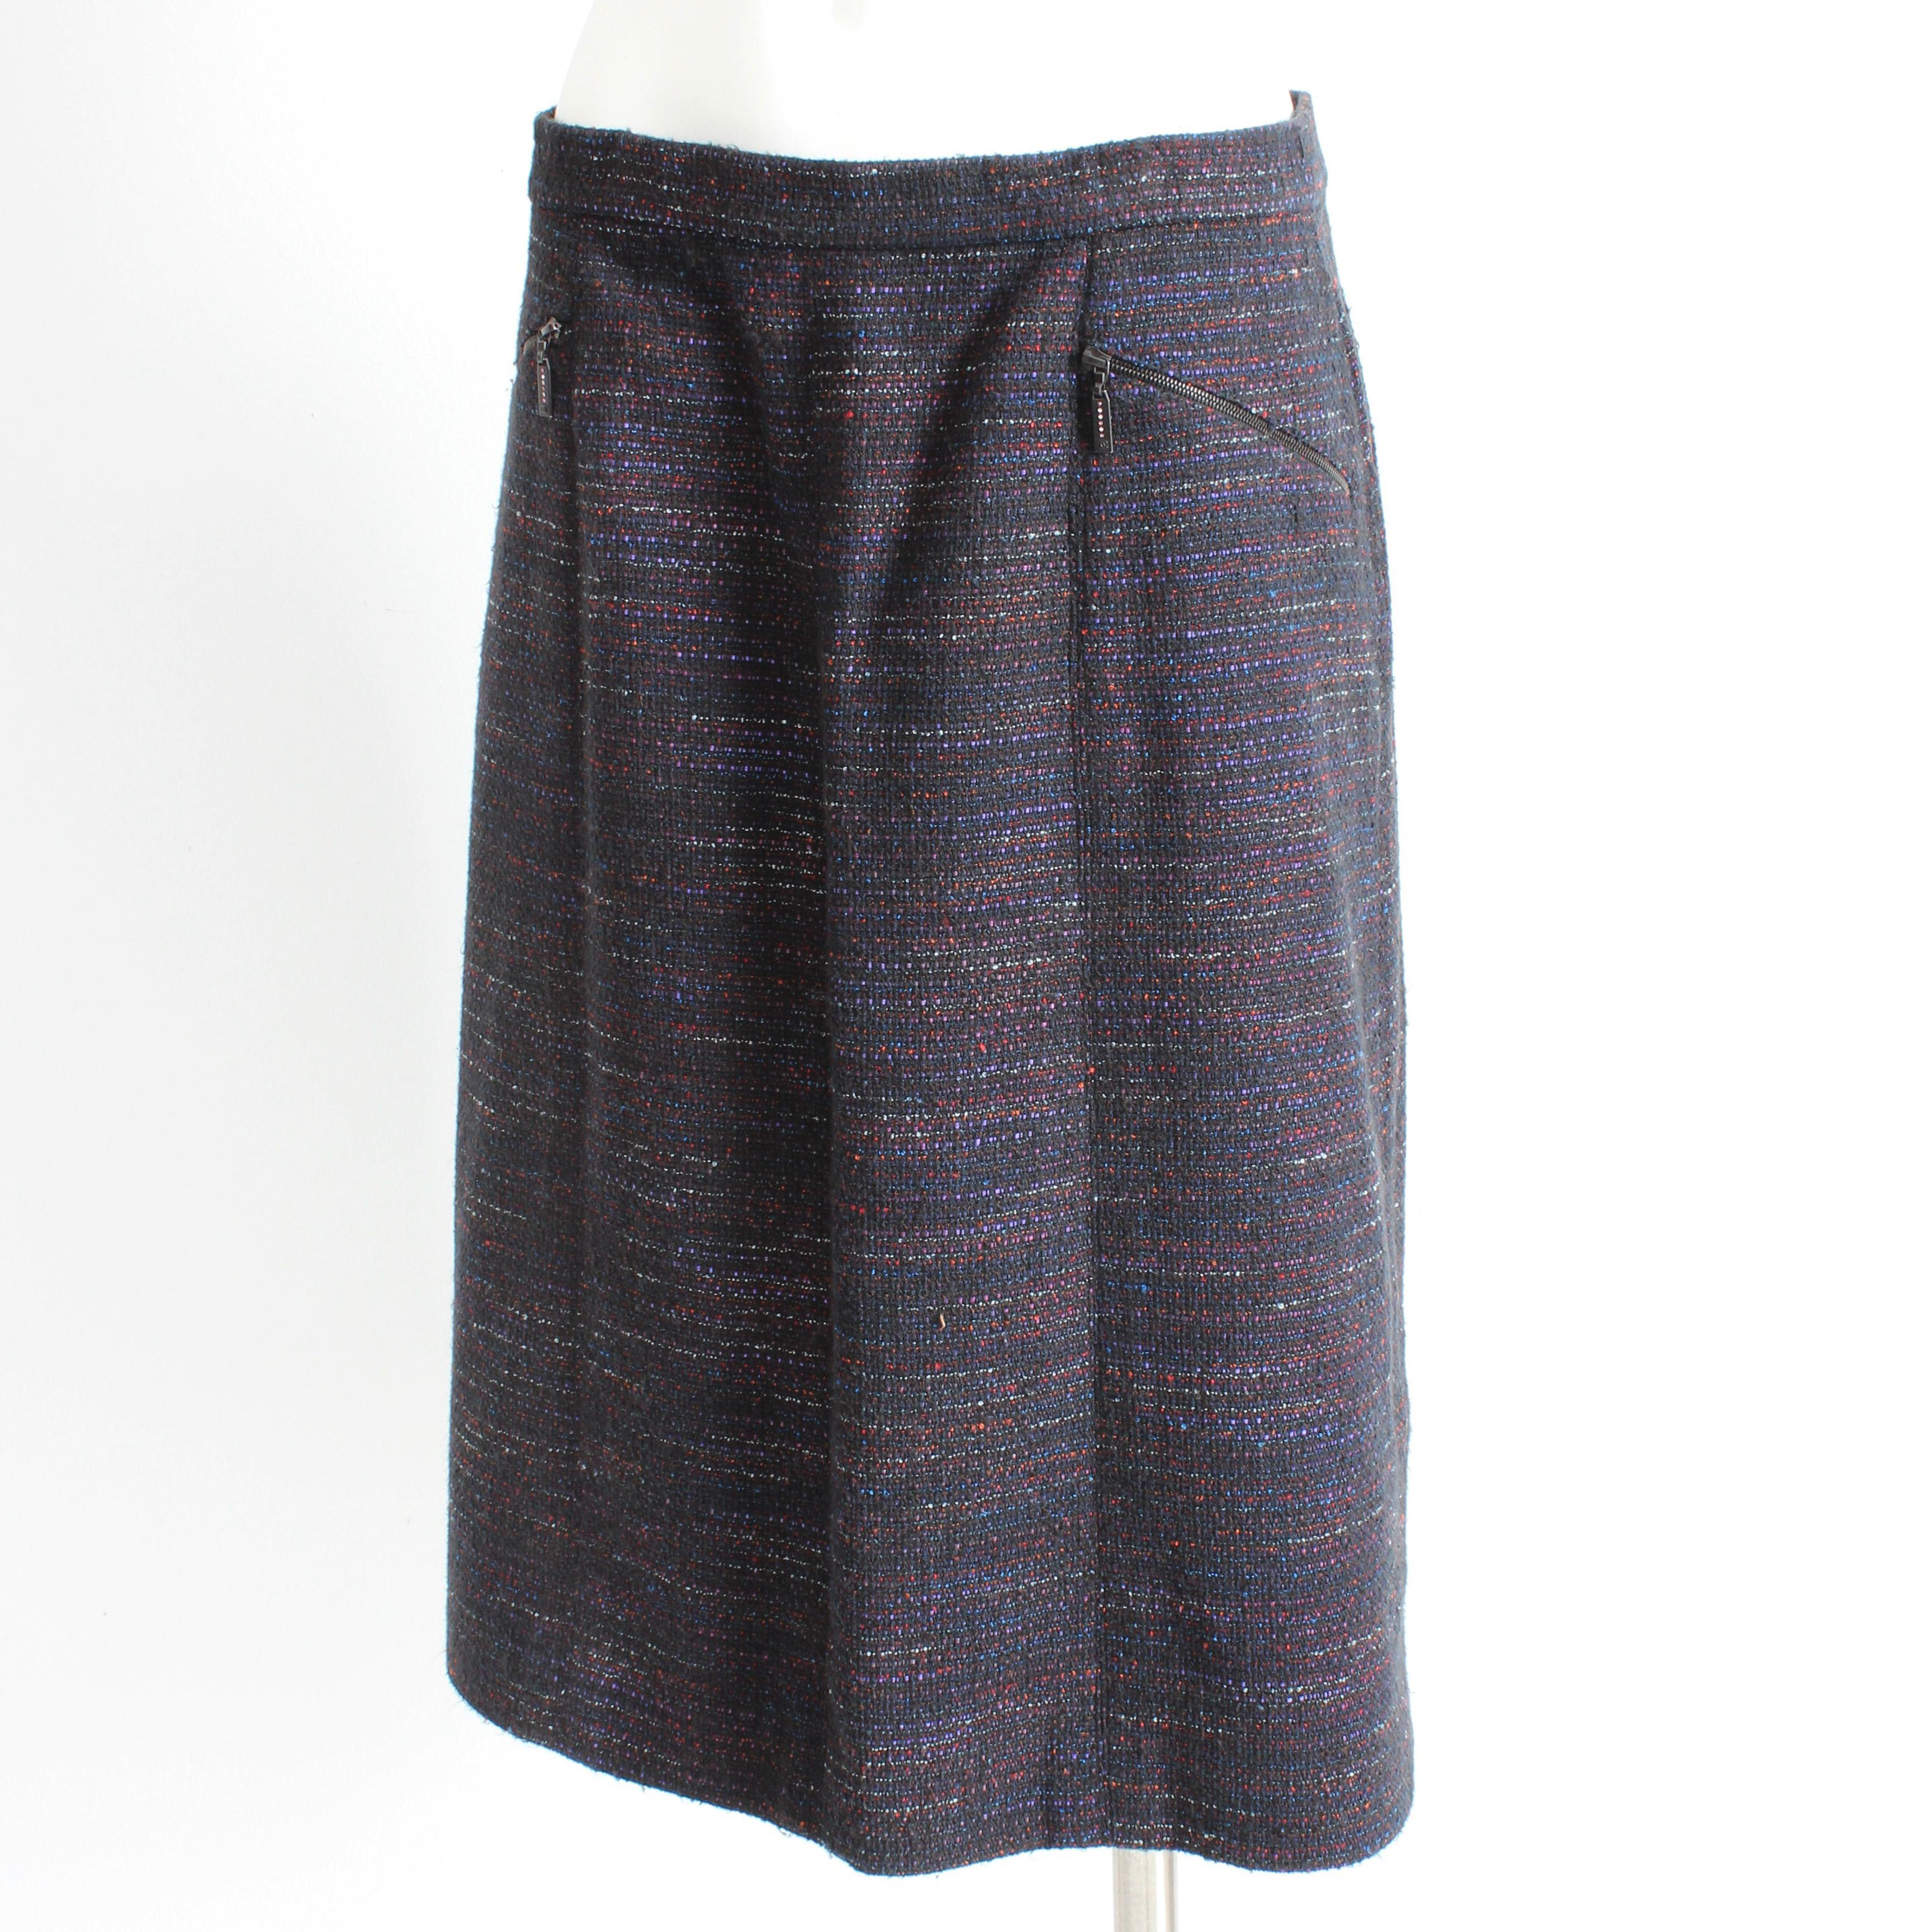 Chanel Skirt Multicolor Cotton Blend Tweed Pencil Style 02A Collection Size 40 For Sale 4